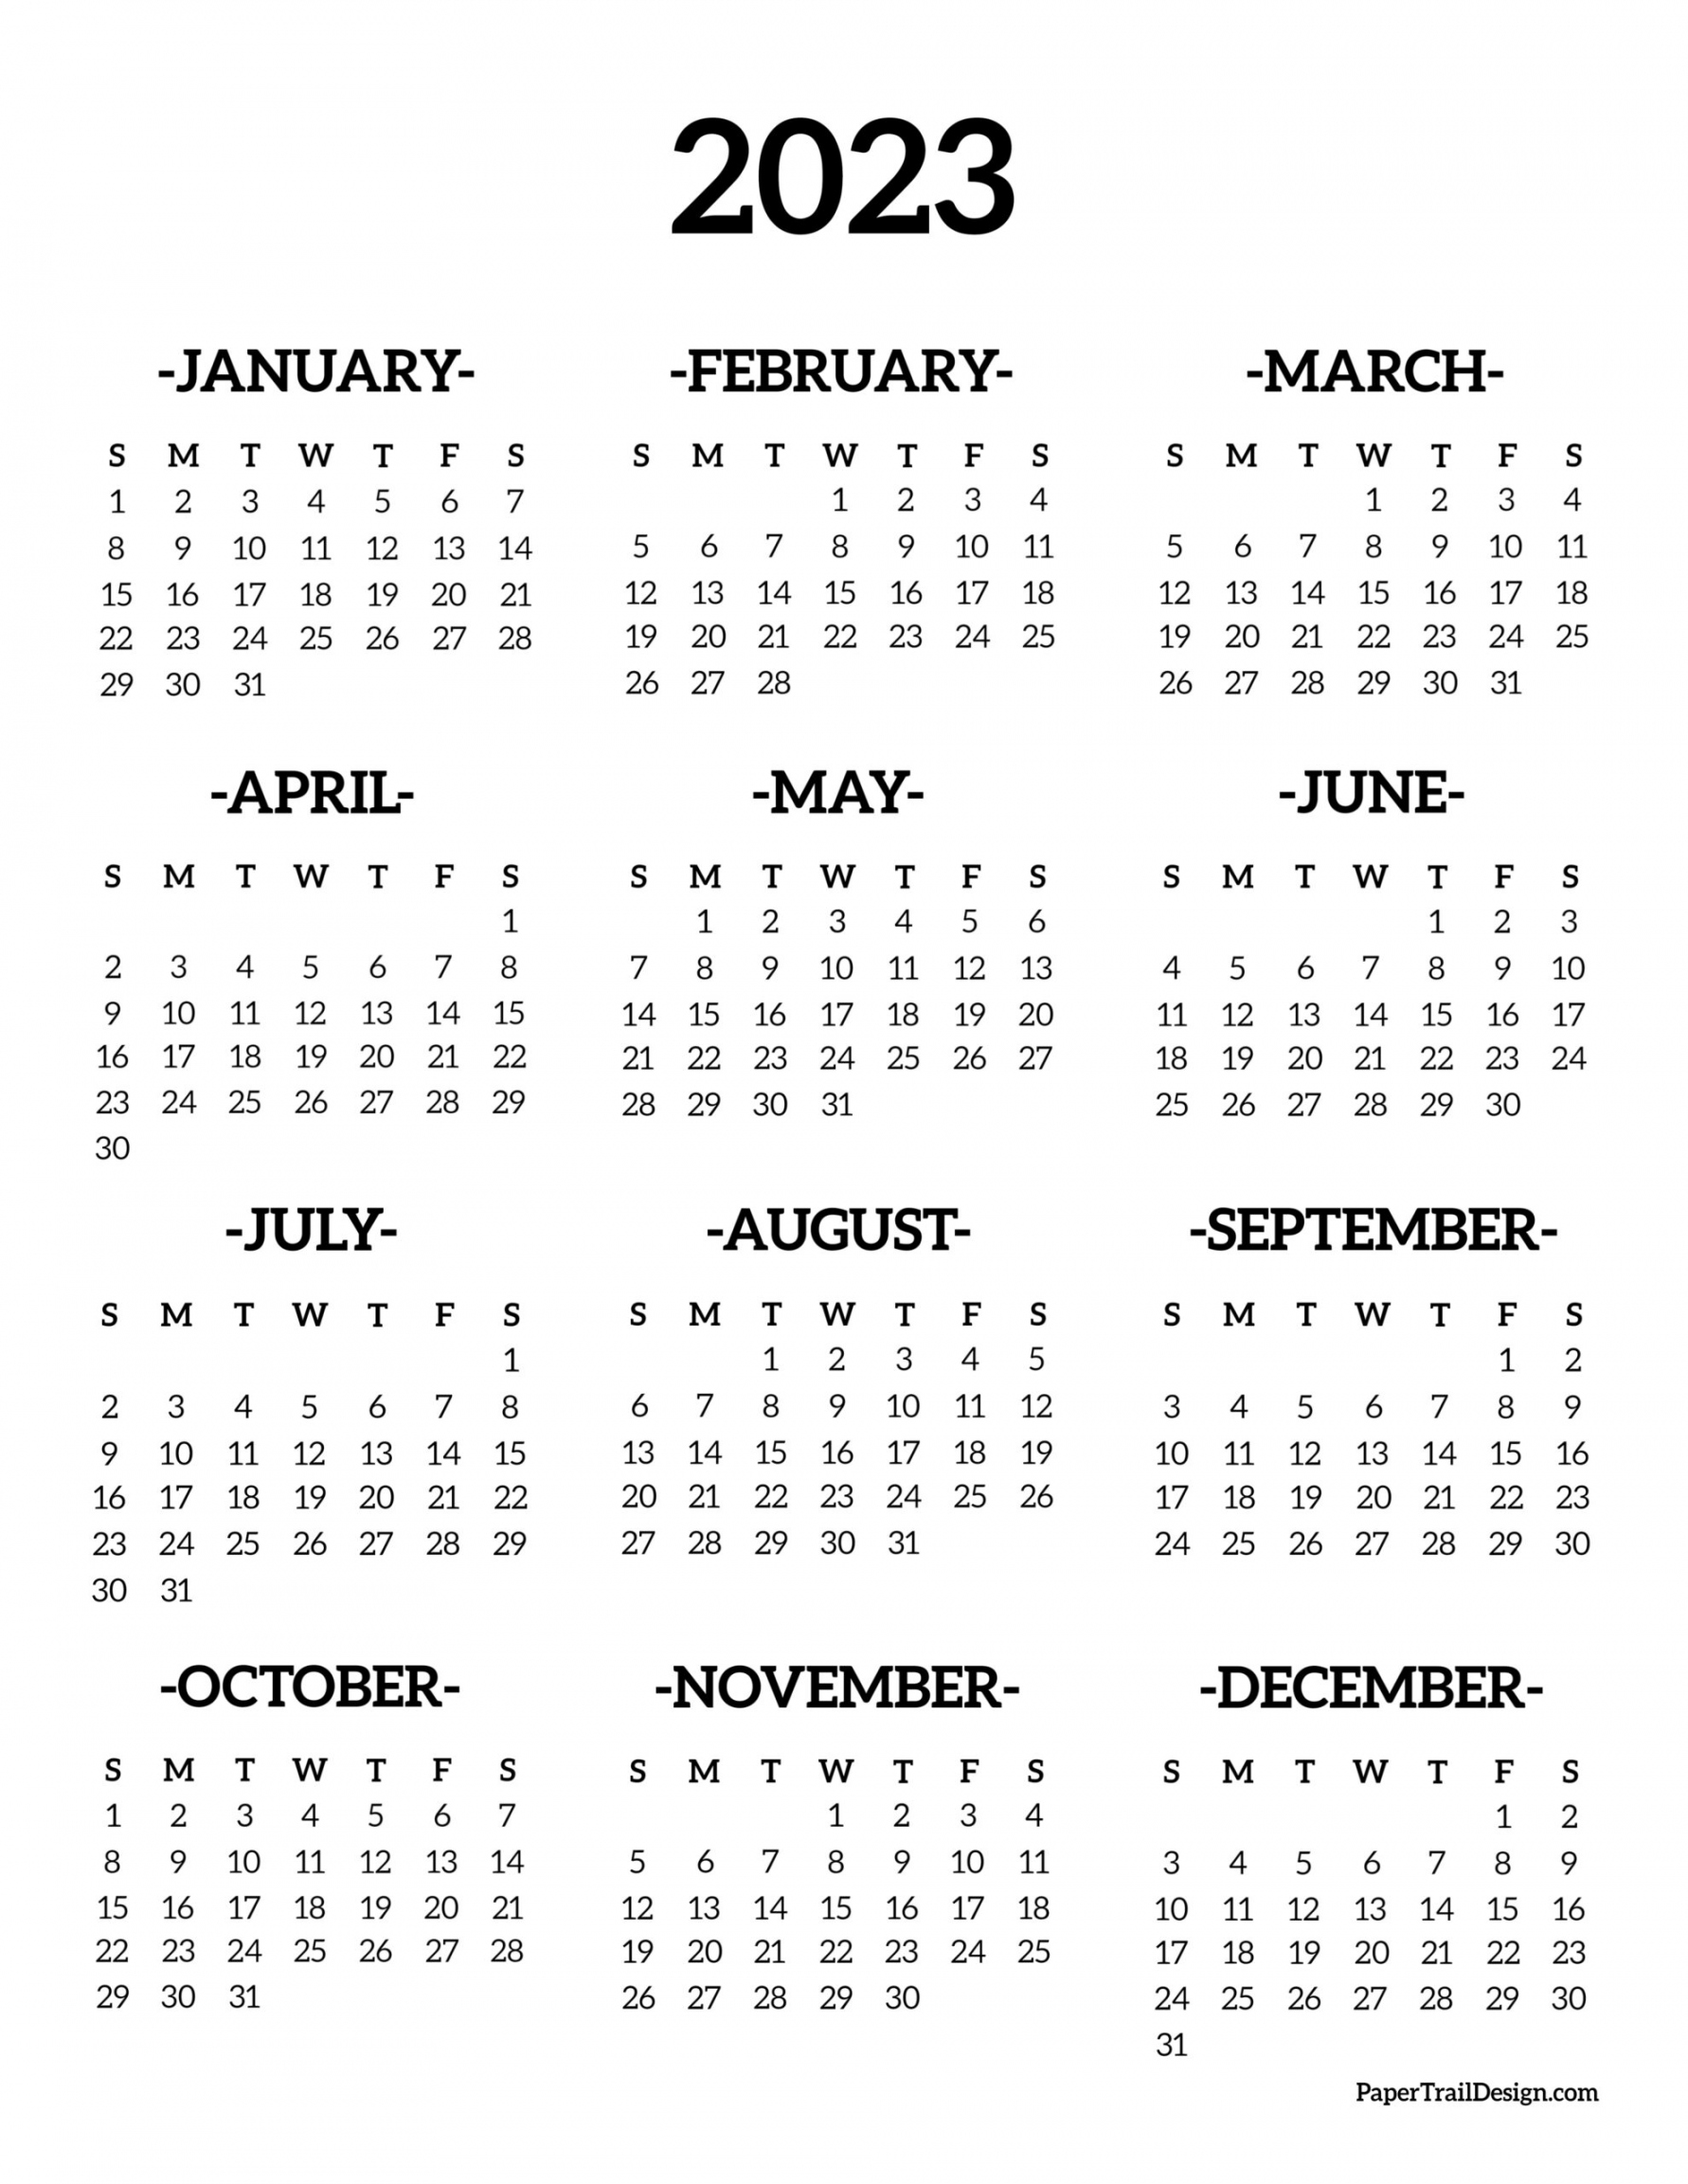 Free 2023 Calendar Printable - Printable - Calendar  Printable One Page - Paper Trail Design